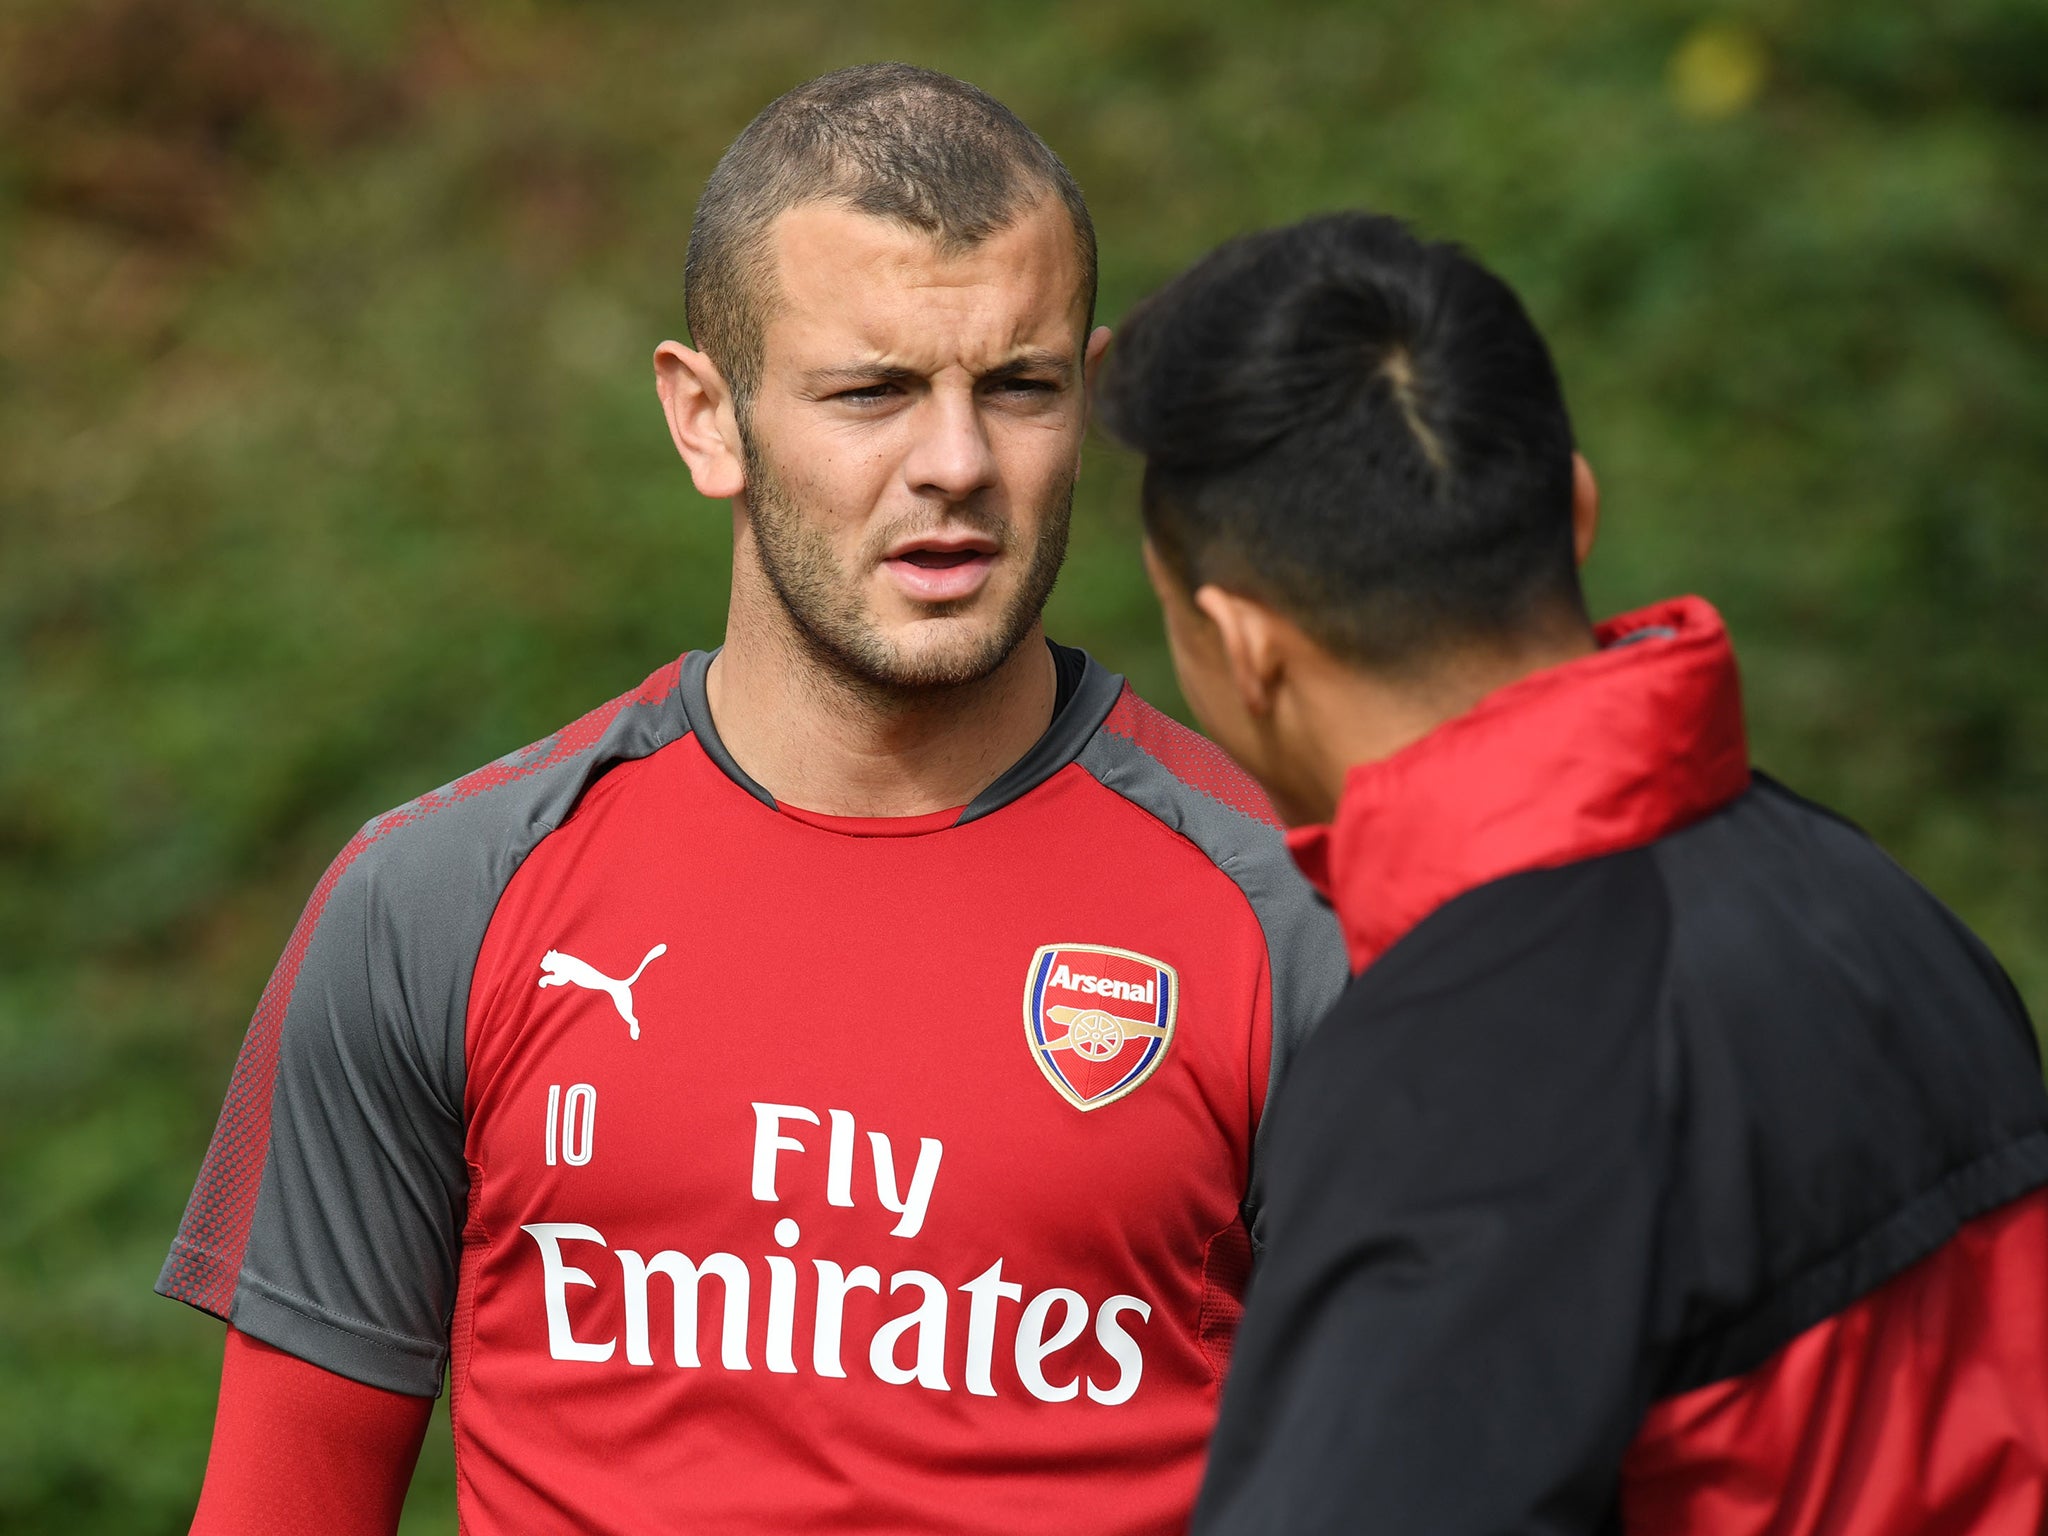 Jack Wilshere is in line to start Arsenal's Carabao Cup clash with Doncaster